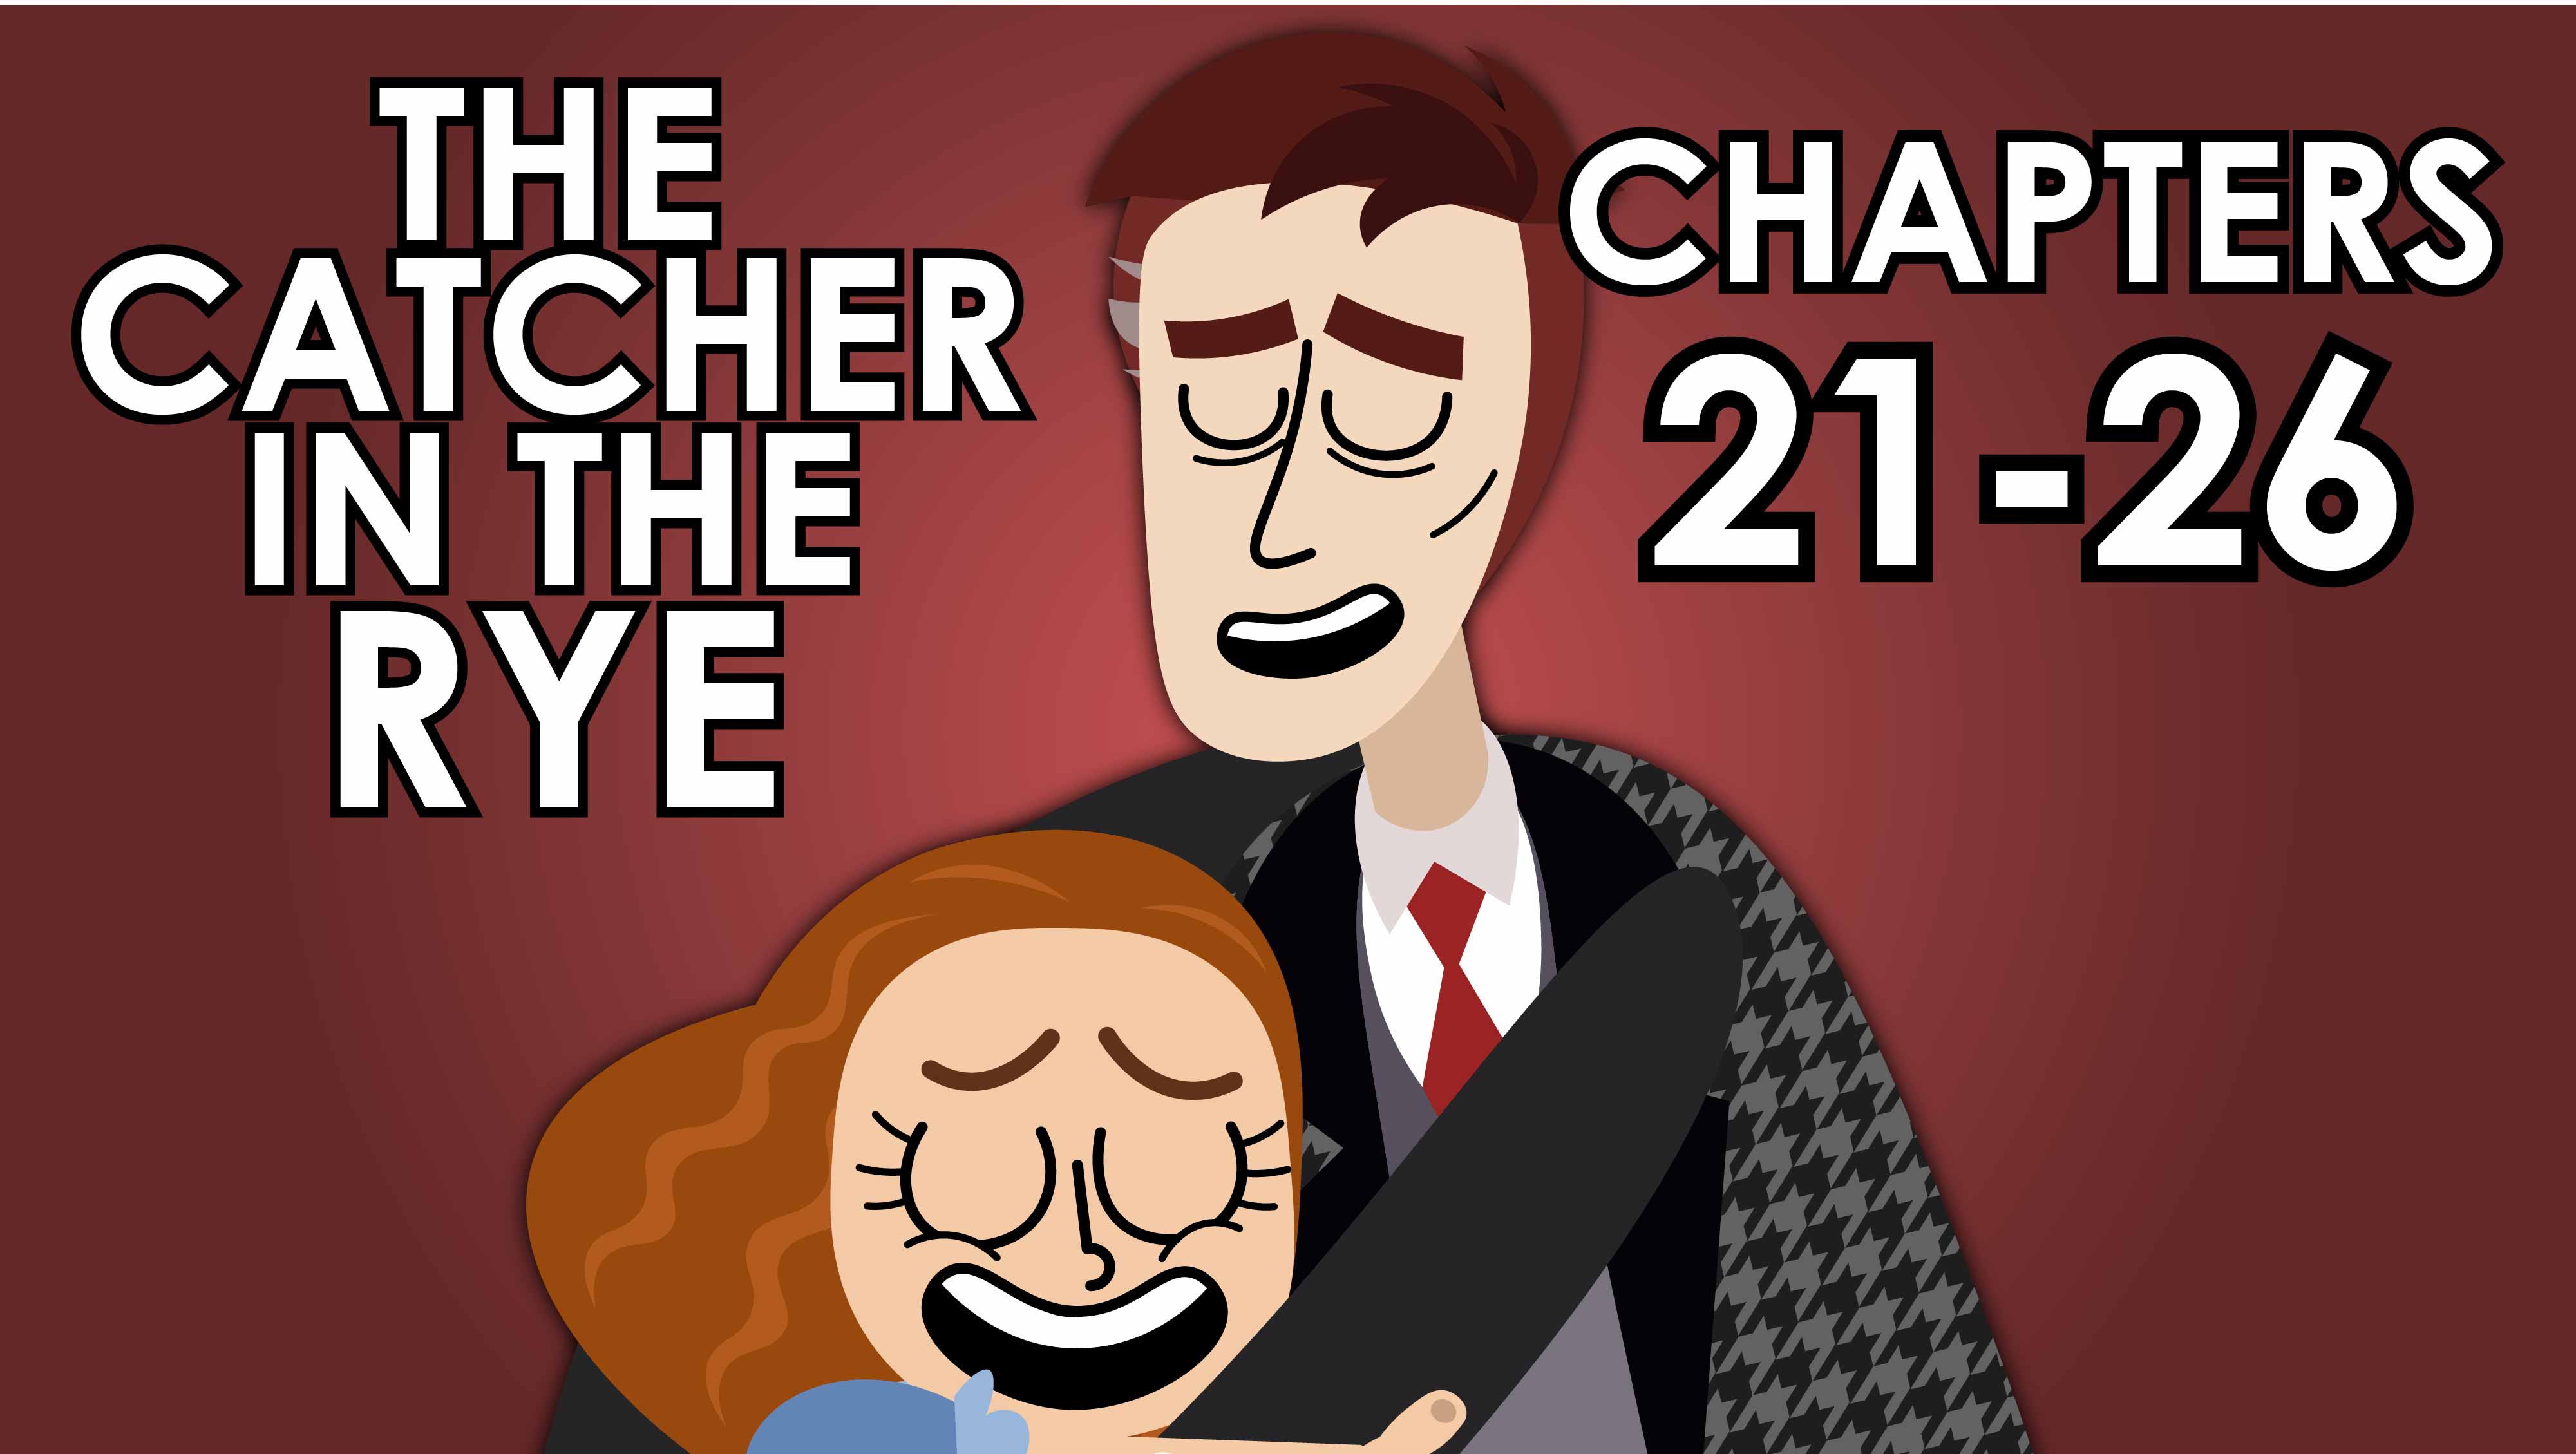 The Catcher in the Rye - J.D. Salinger - Chapters 21-26 summary - Powering Through Prose Series